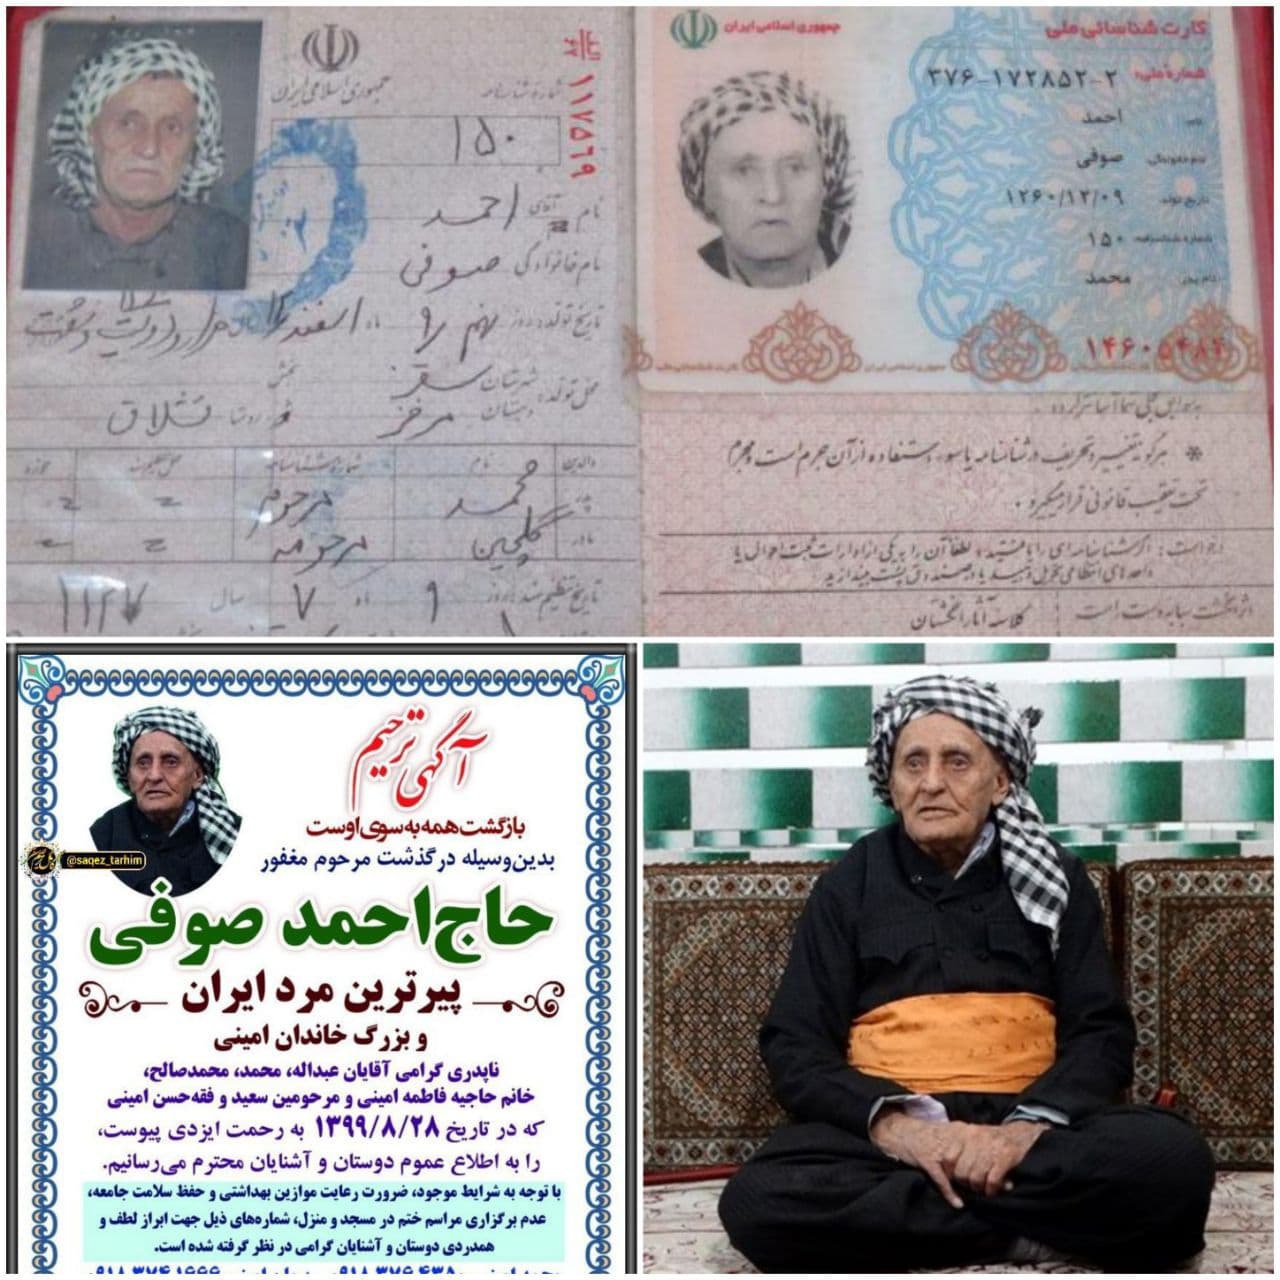 Oldest man in Iran and Kurdistan province passes away